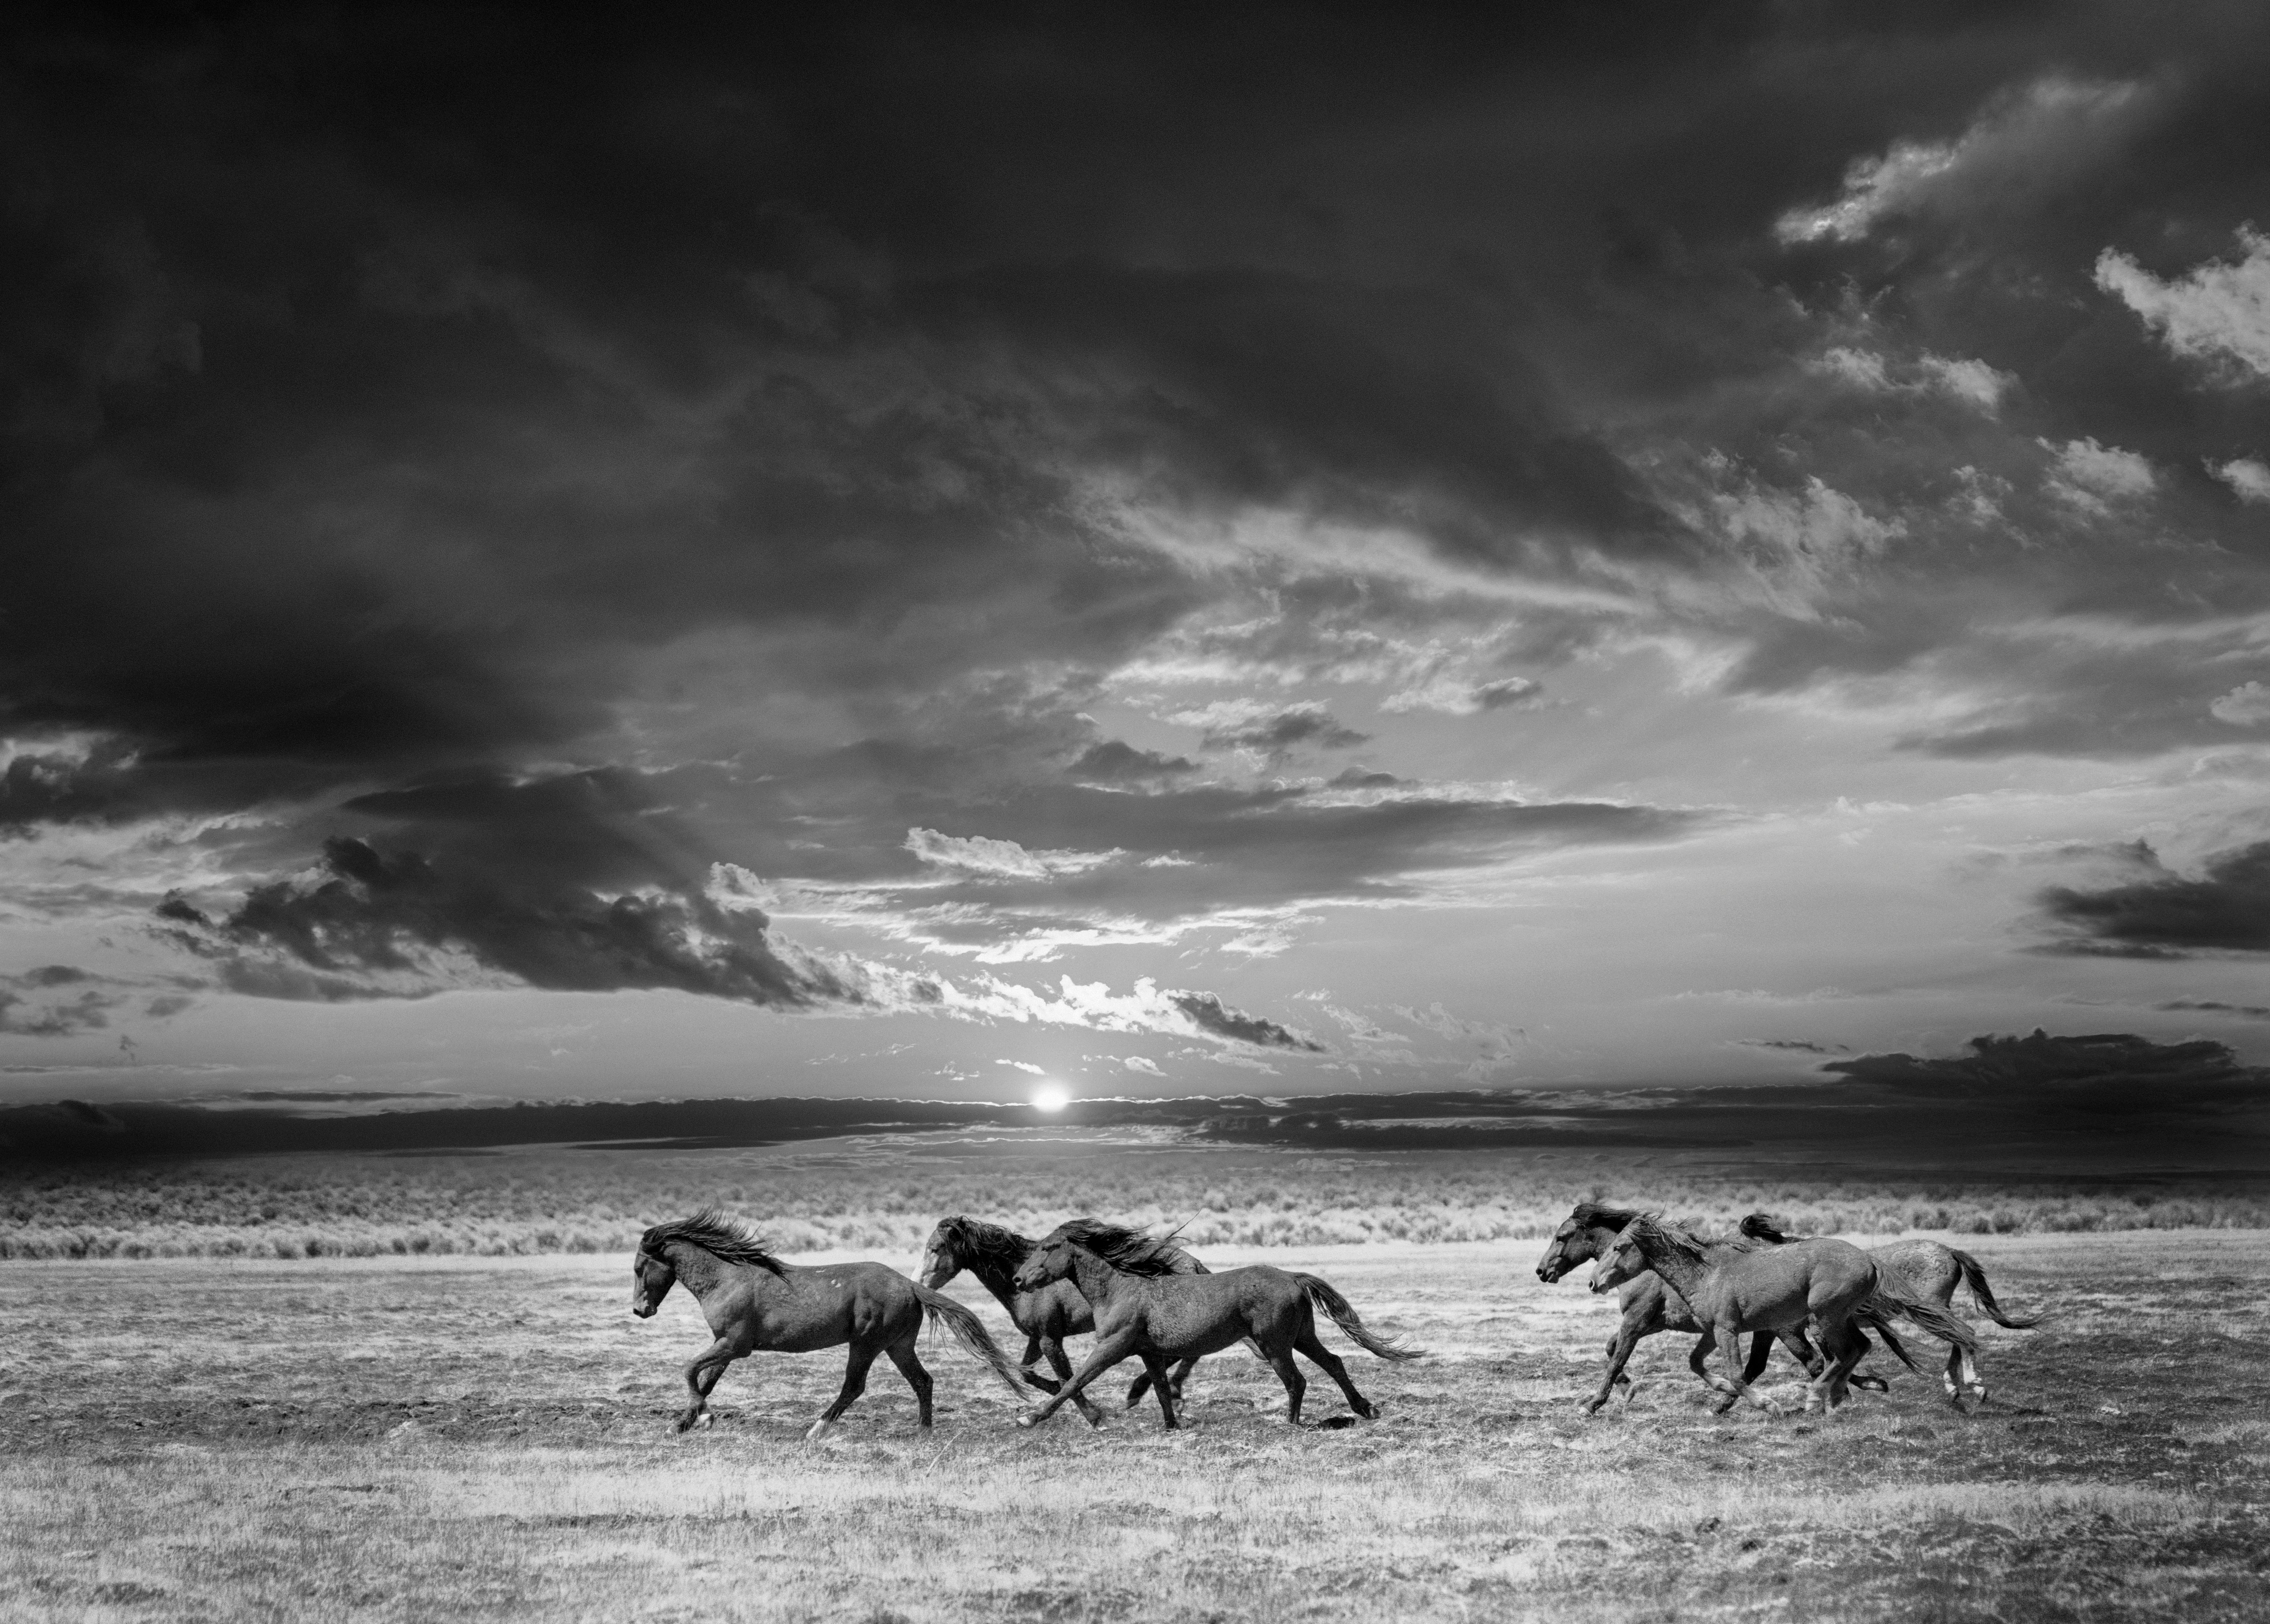 Shane Russeck Black and White Photograph - Chasing the Light 36x48 Mustangs Photography of Wild Horses Unsigned Western Art